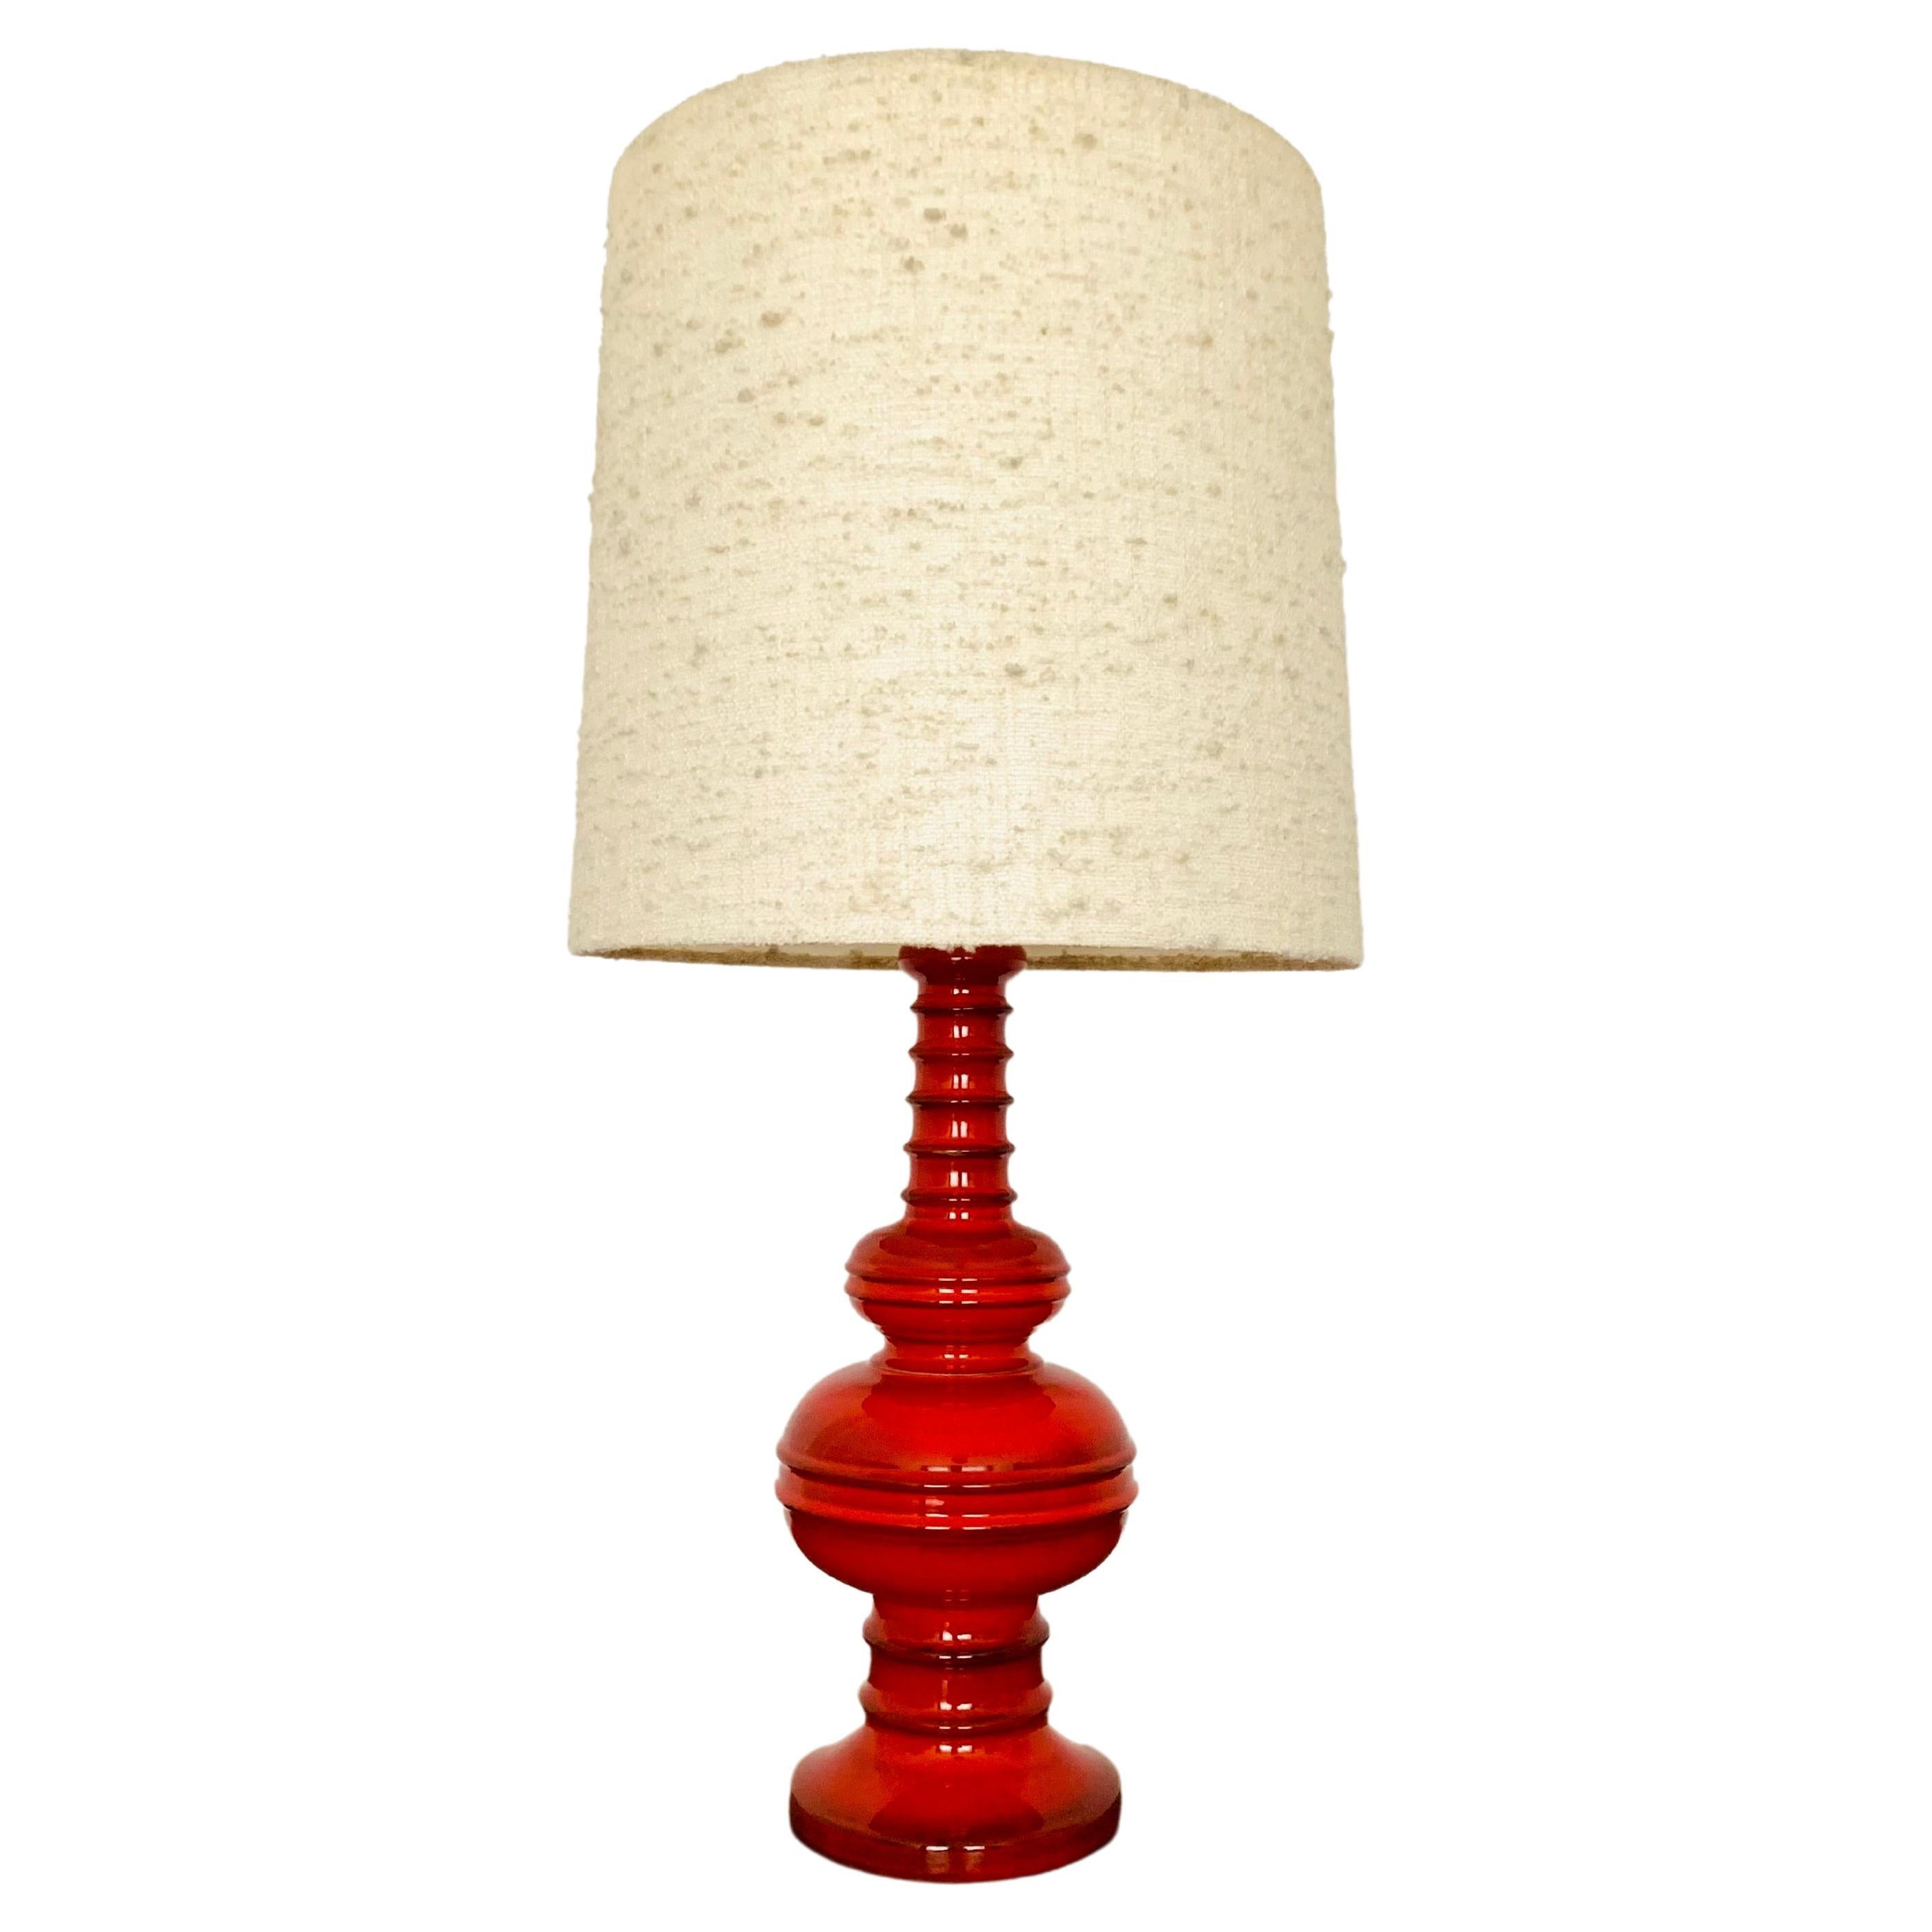 Large Ceramic Table Lamp from Goebel